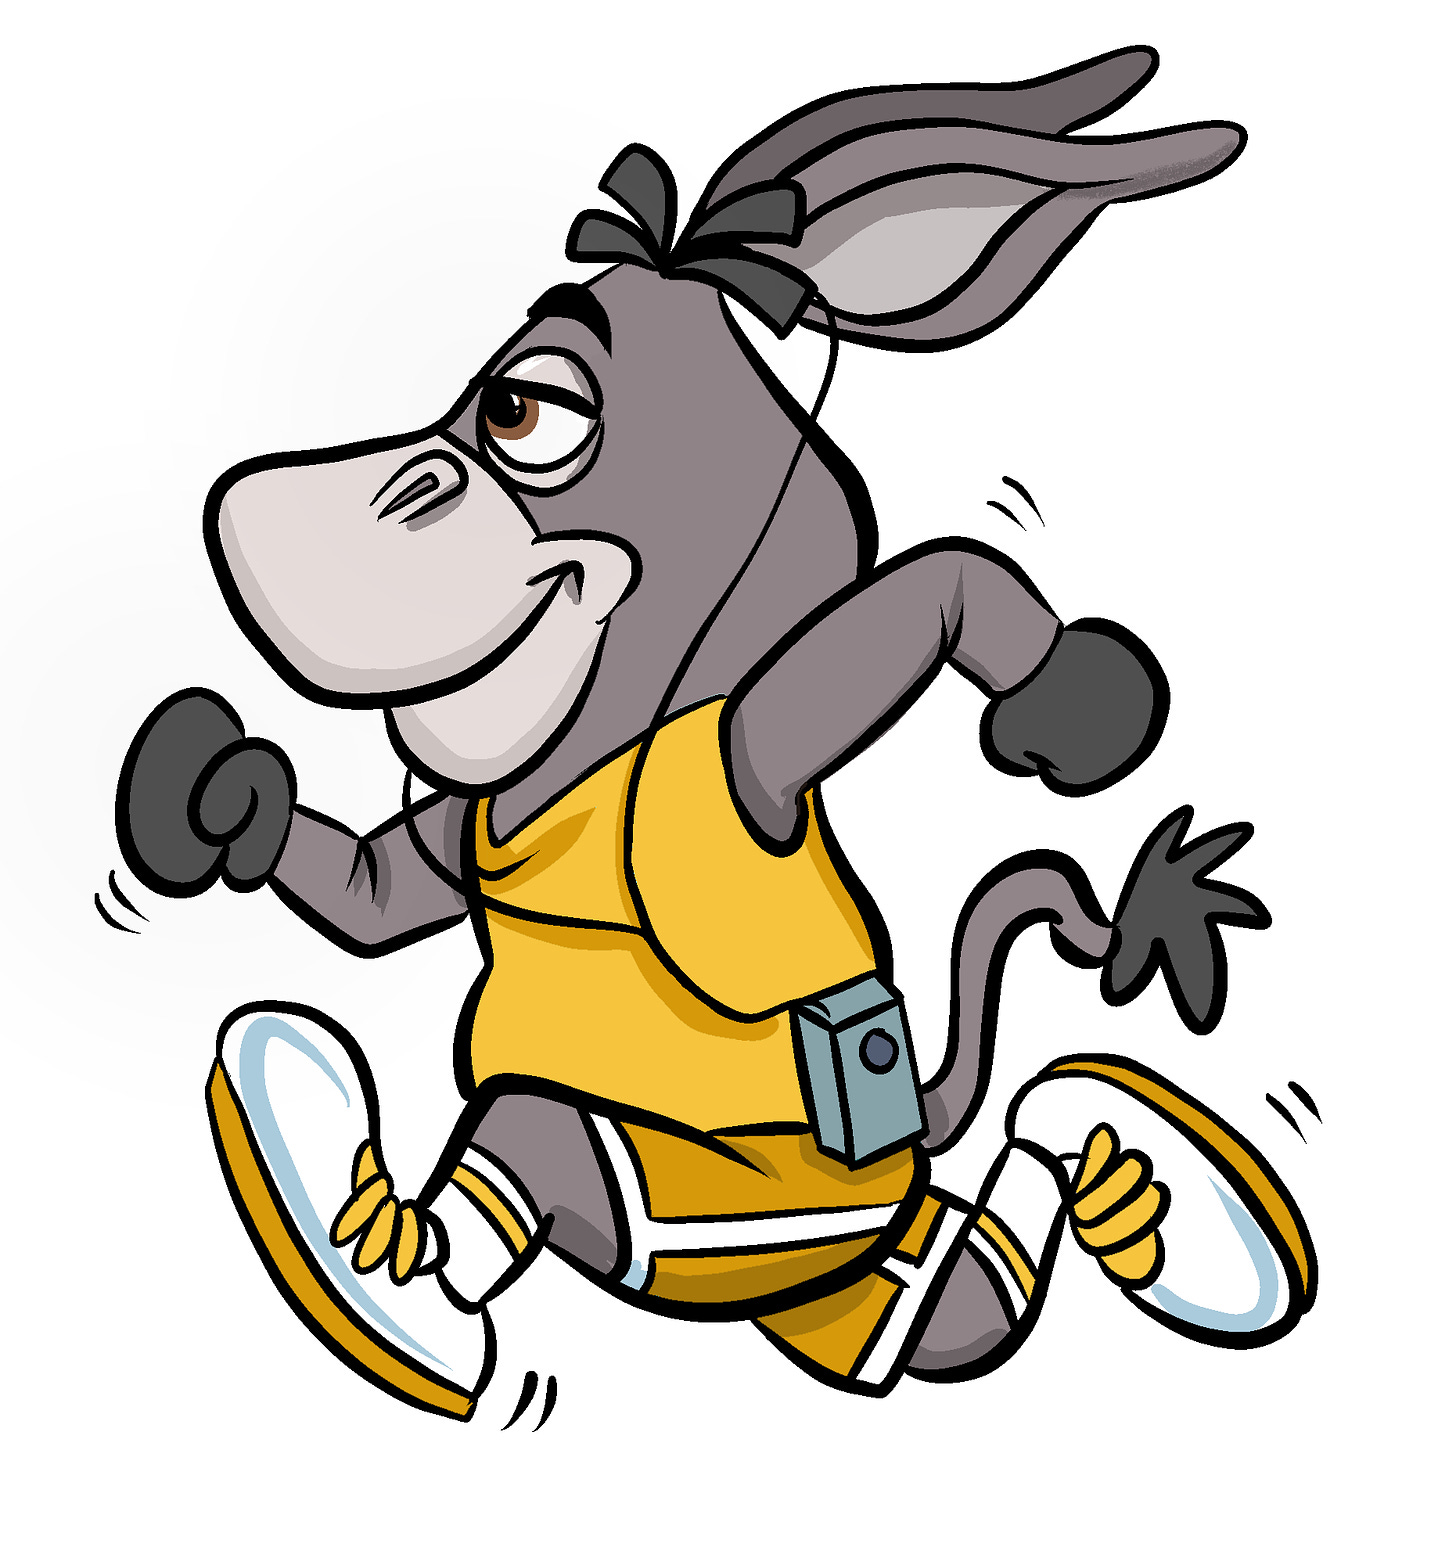 Illustration of the Jackass Letters mascot running.